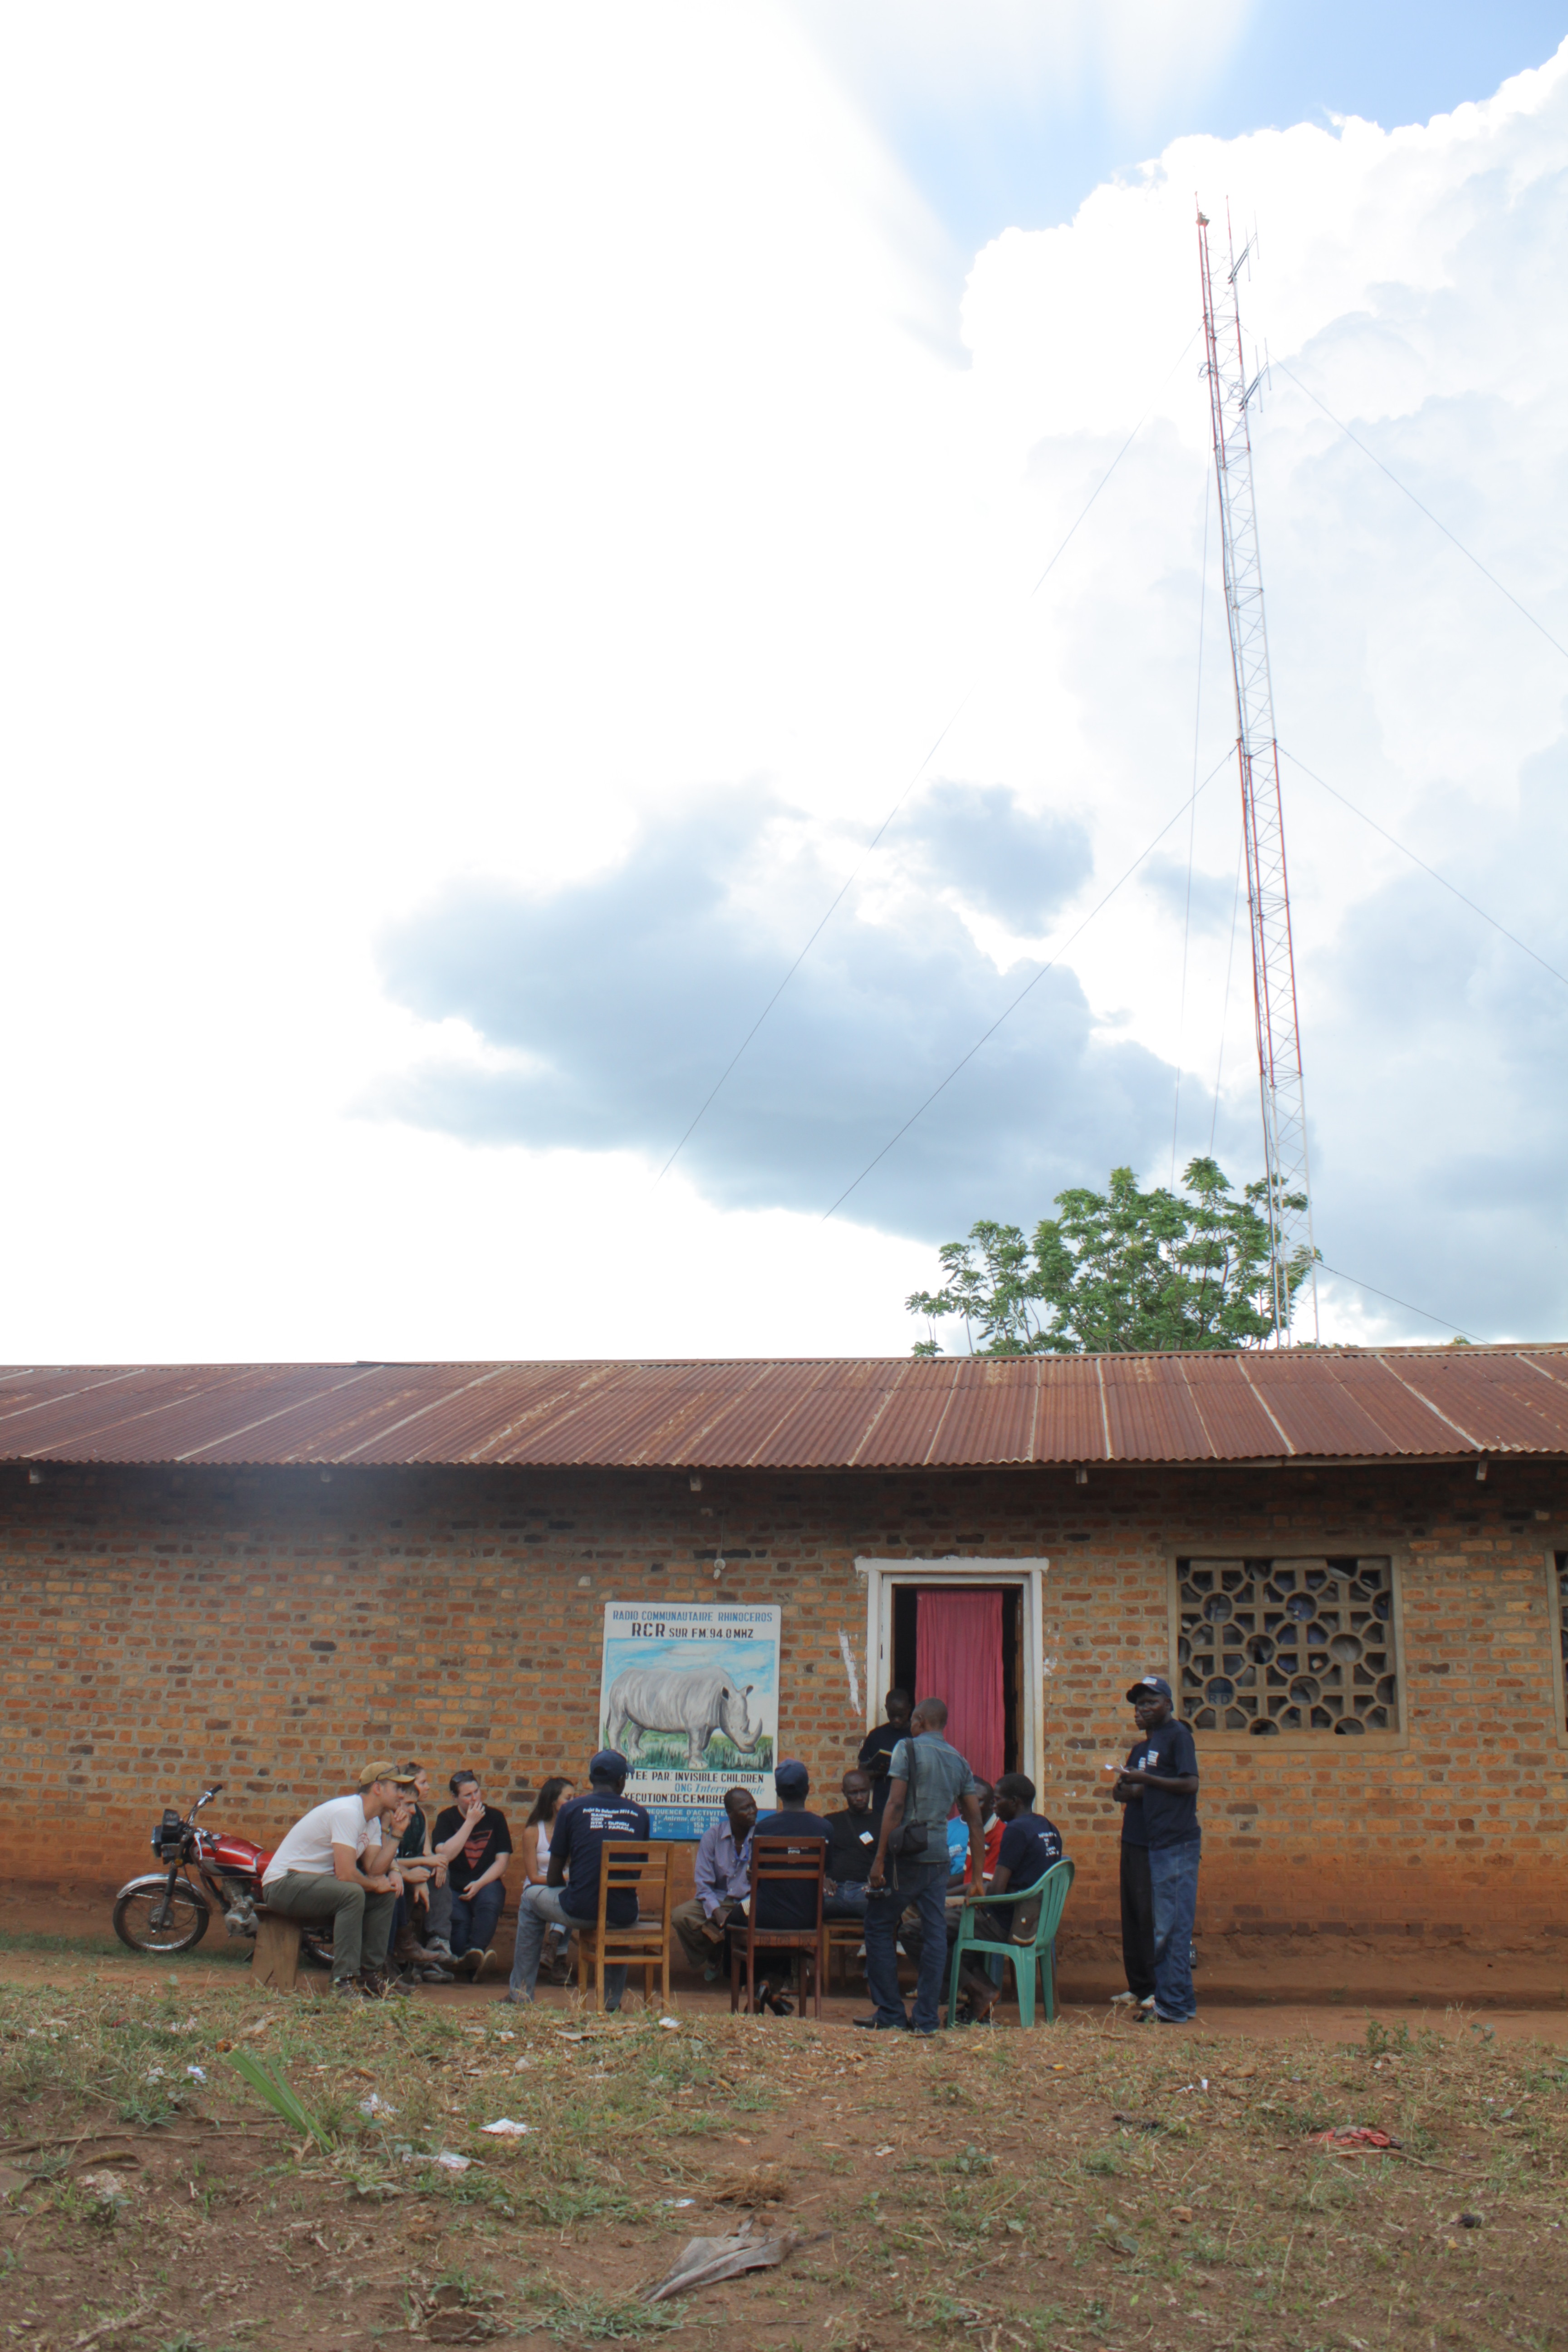 Down the road in Faradje, DRC, we met with the passionate team at Radio Rhino, another partner radio station, to talk with them about how Invisible Children support has allowed them to advocate for peace. They’ve expanded their programming beyond ‘Come Home’ messages to also include programs on peacebuilding and trauma healing for the communities their station reaches.